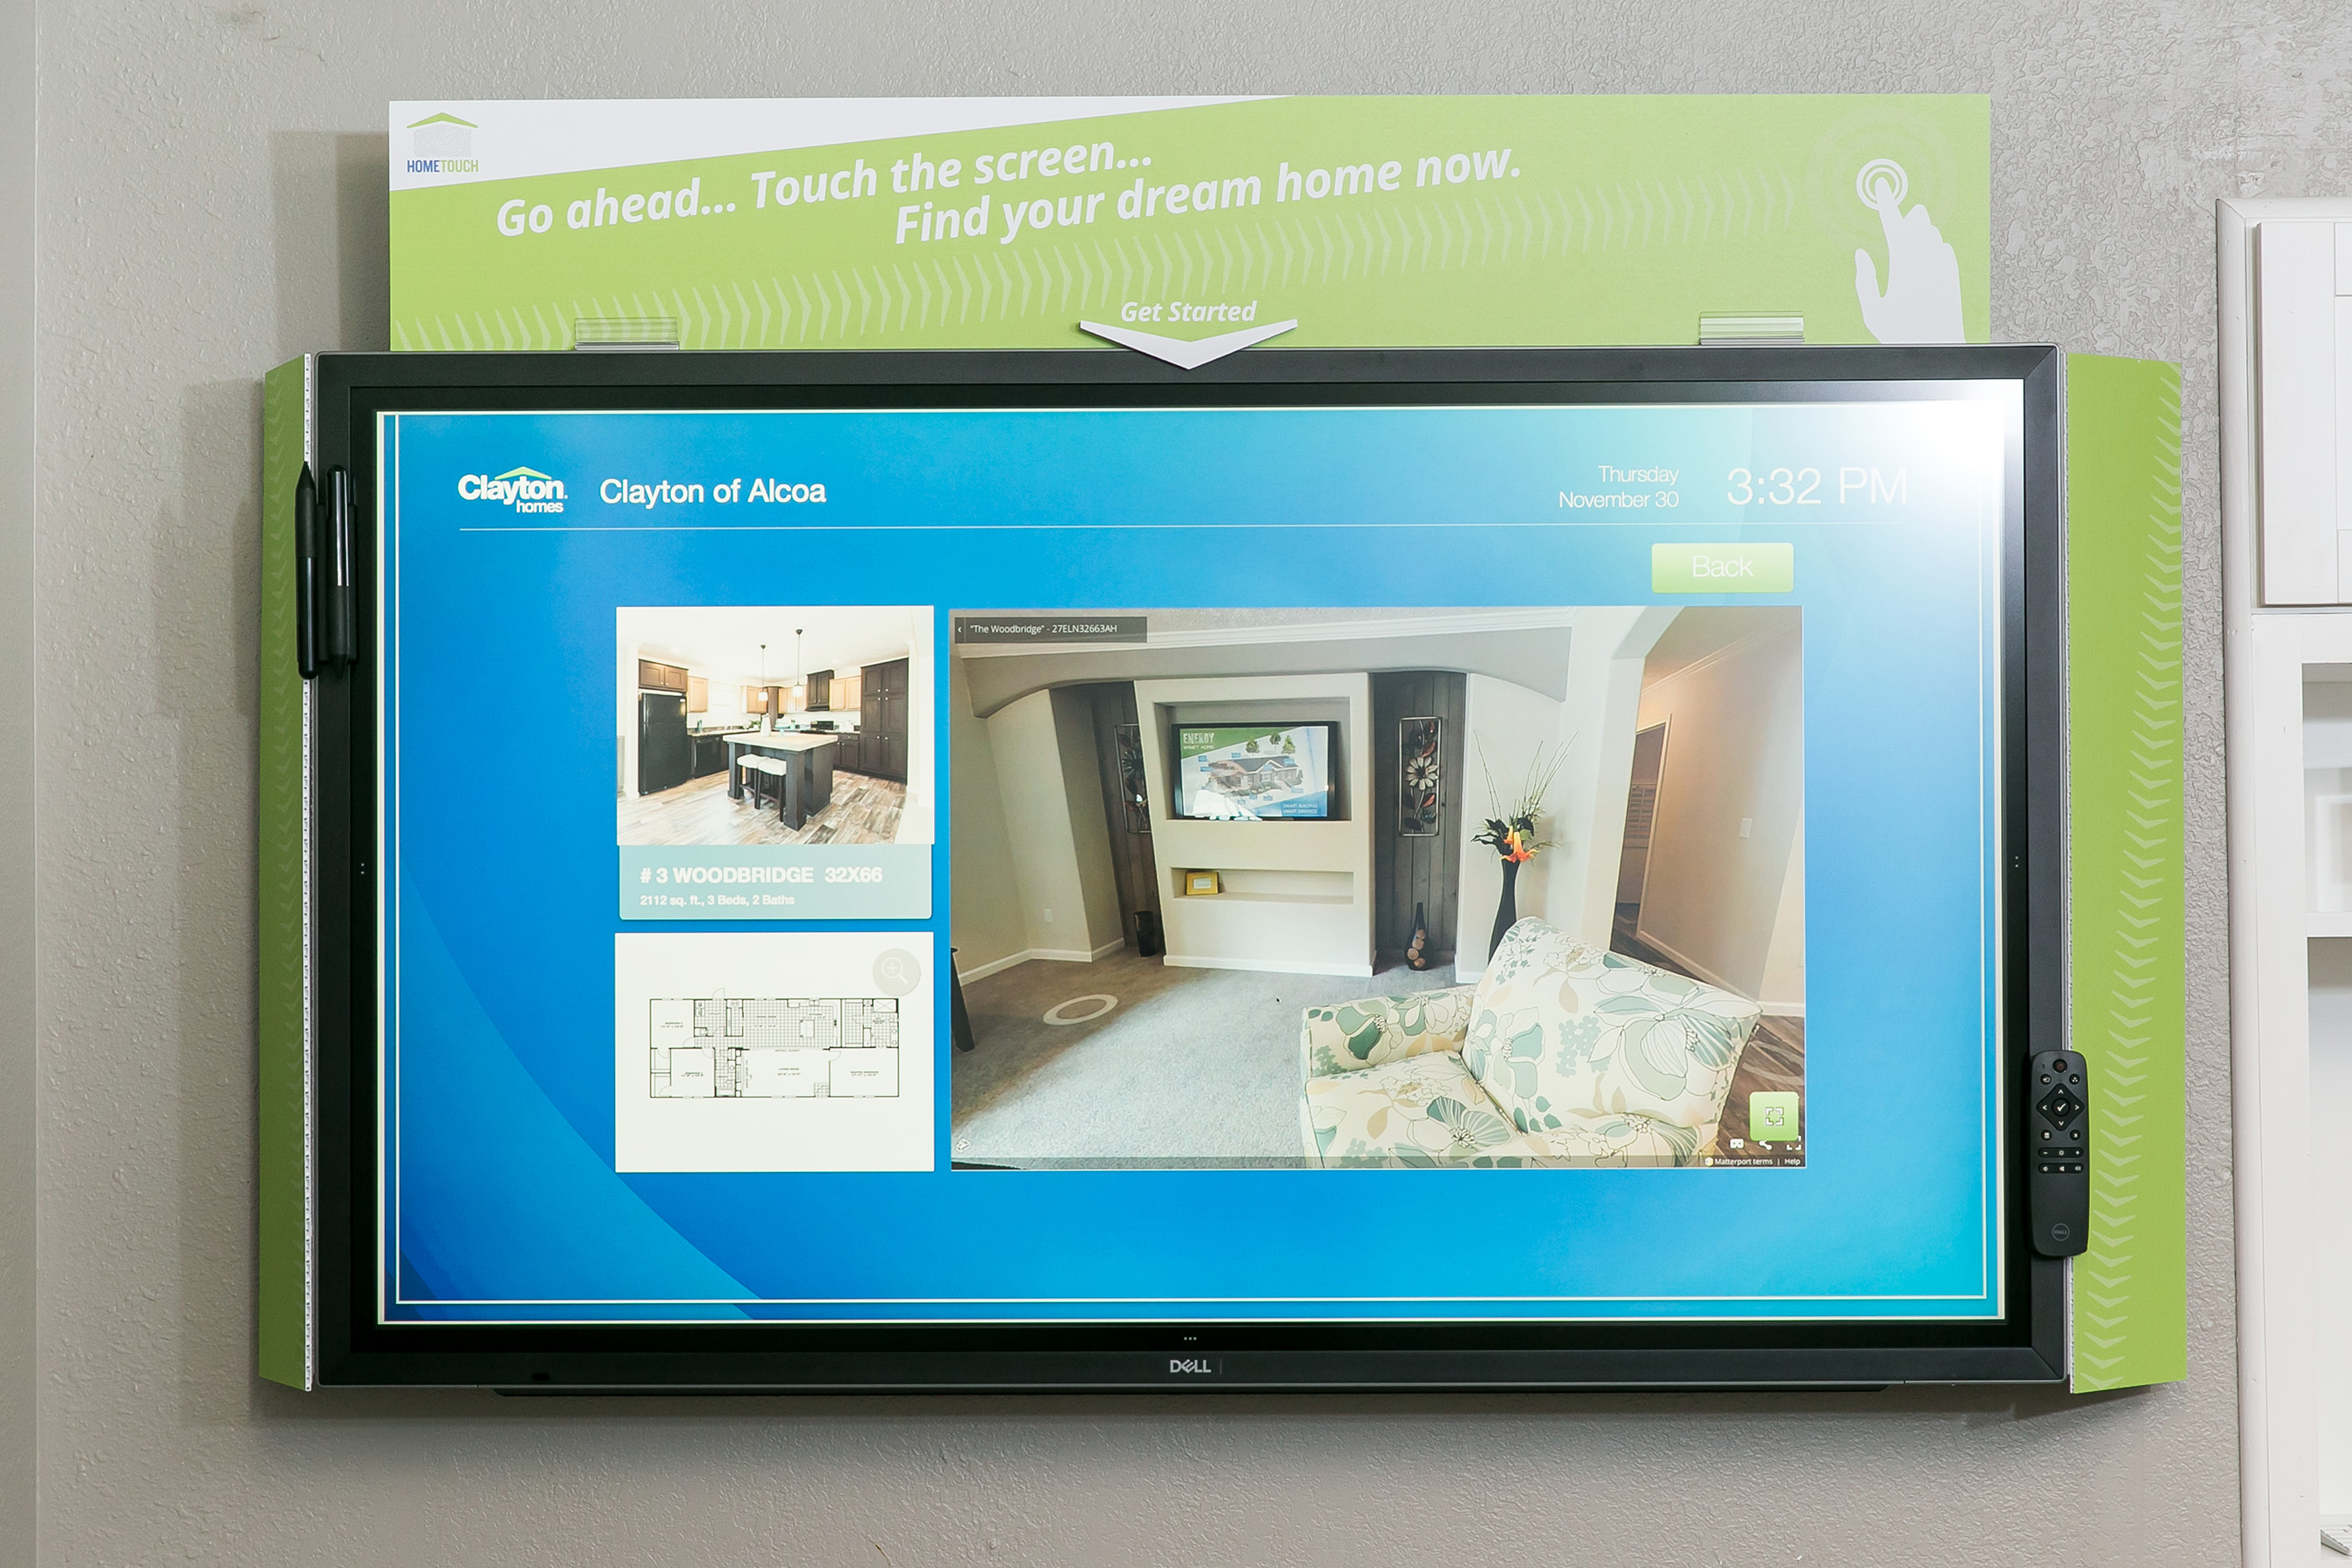 Our home centers are equipped with HomeTouch™ technology to help home buyers find the home that fits their needs.